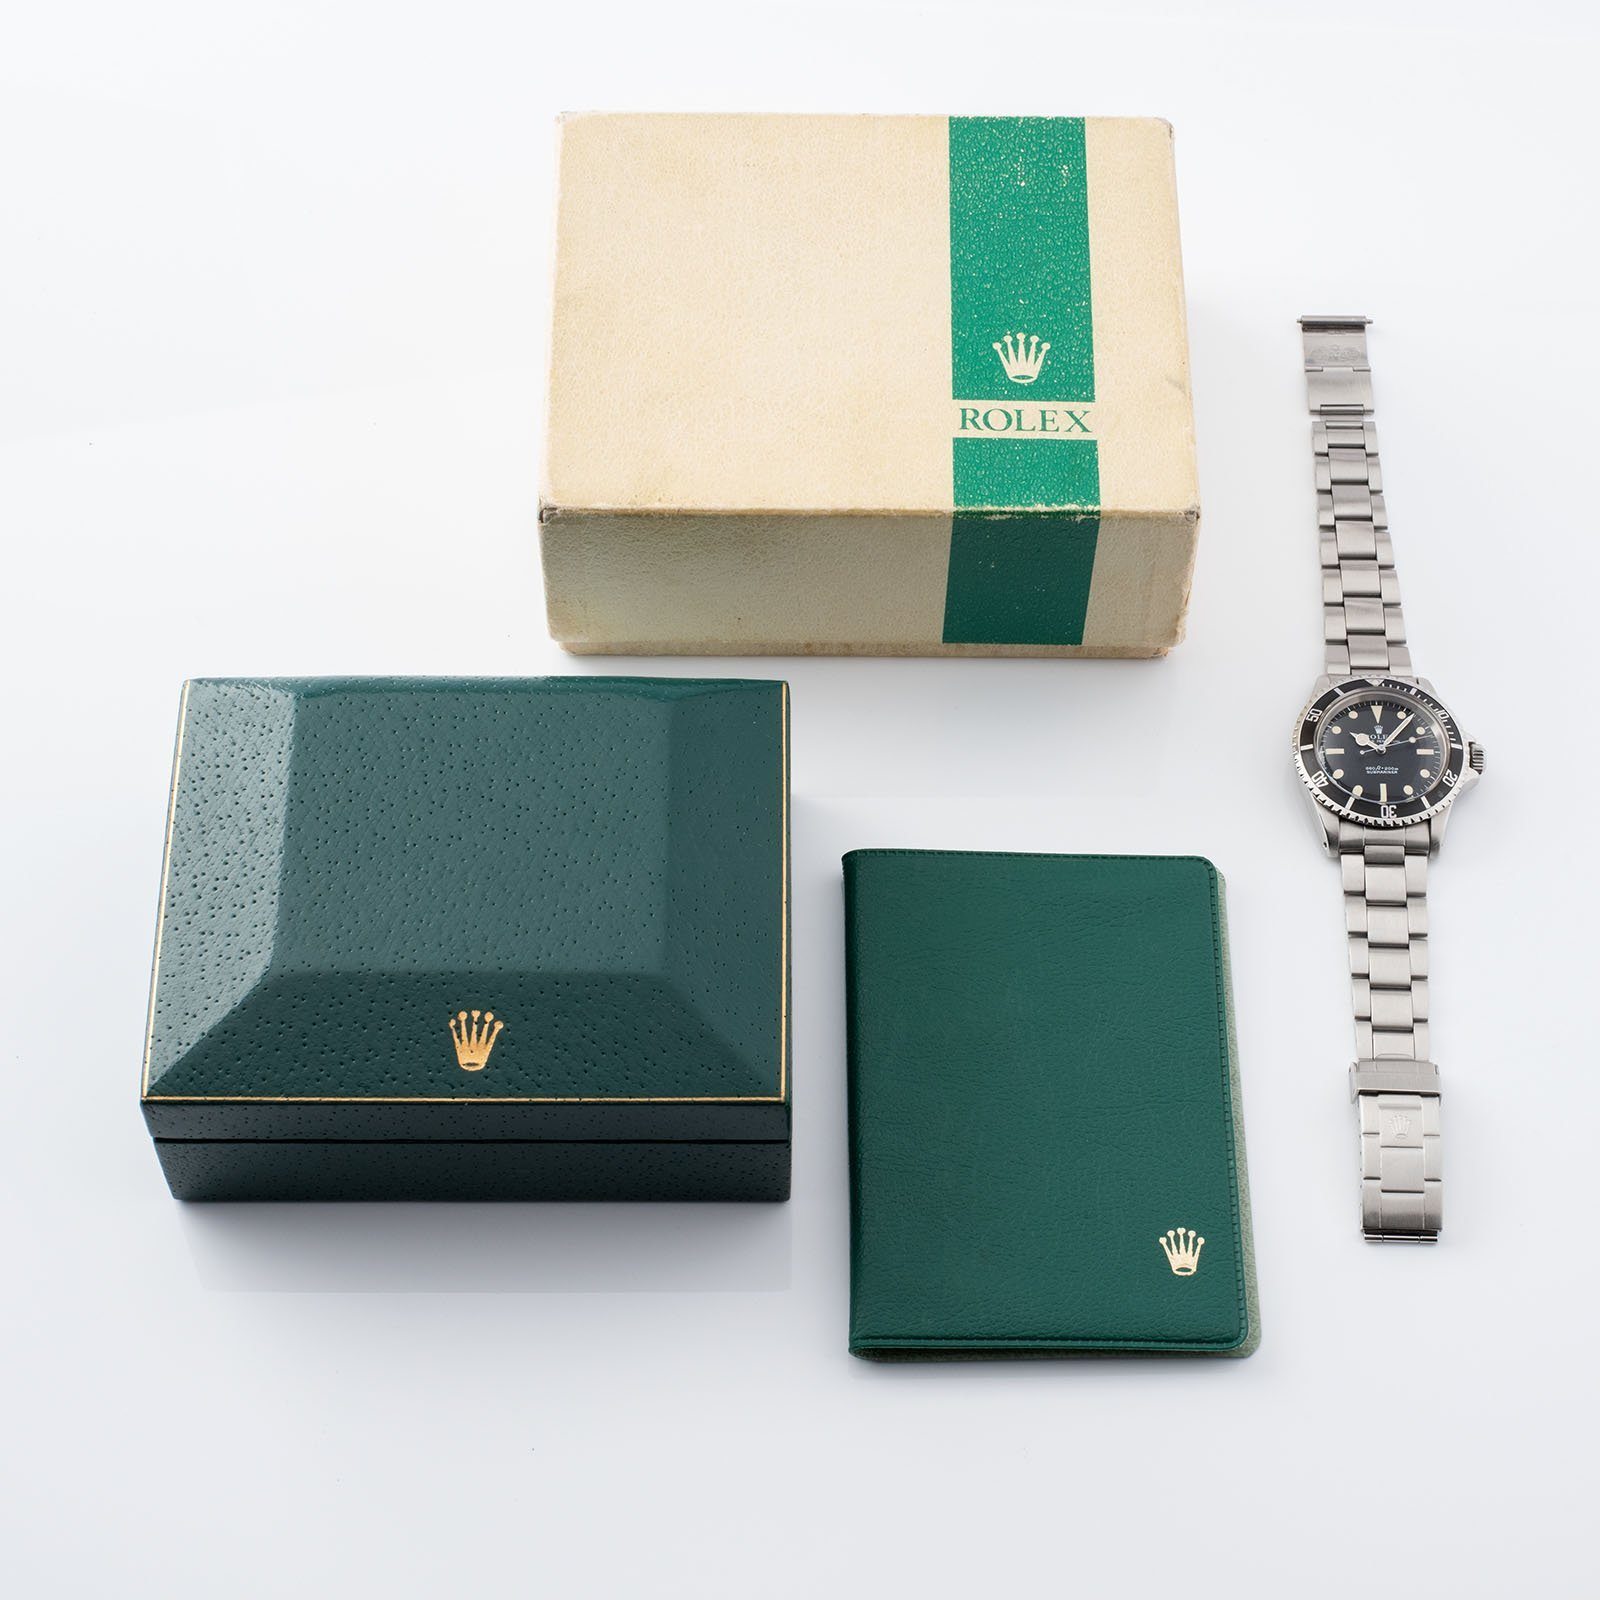 Rolex Submariner Non-Serif Dial 5513 with papers